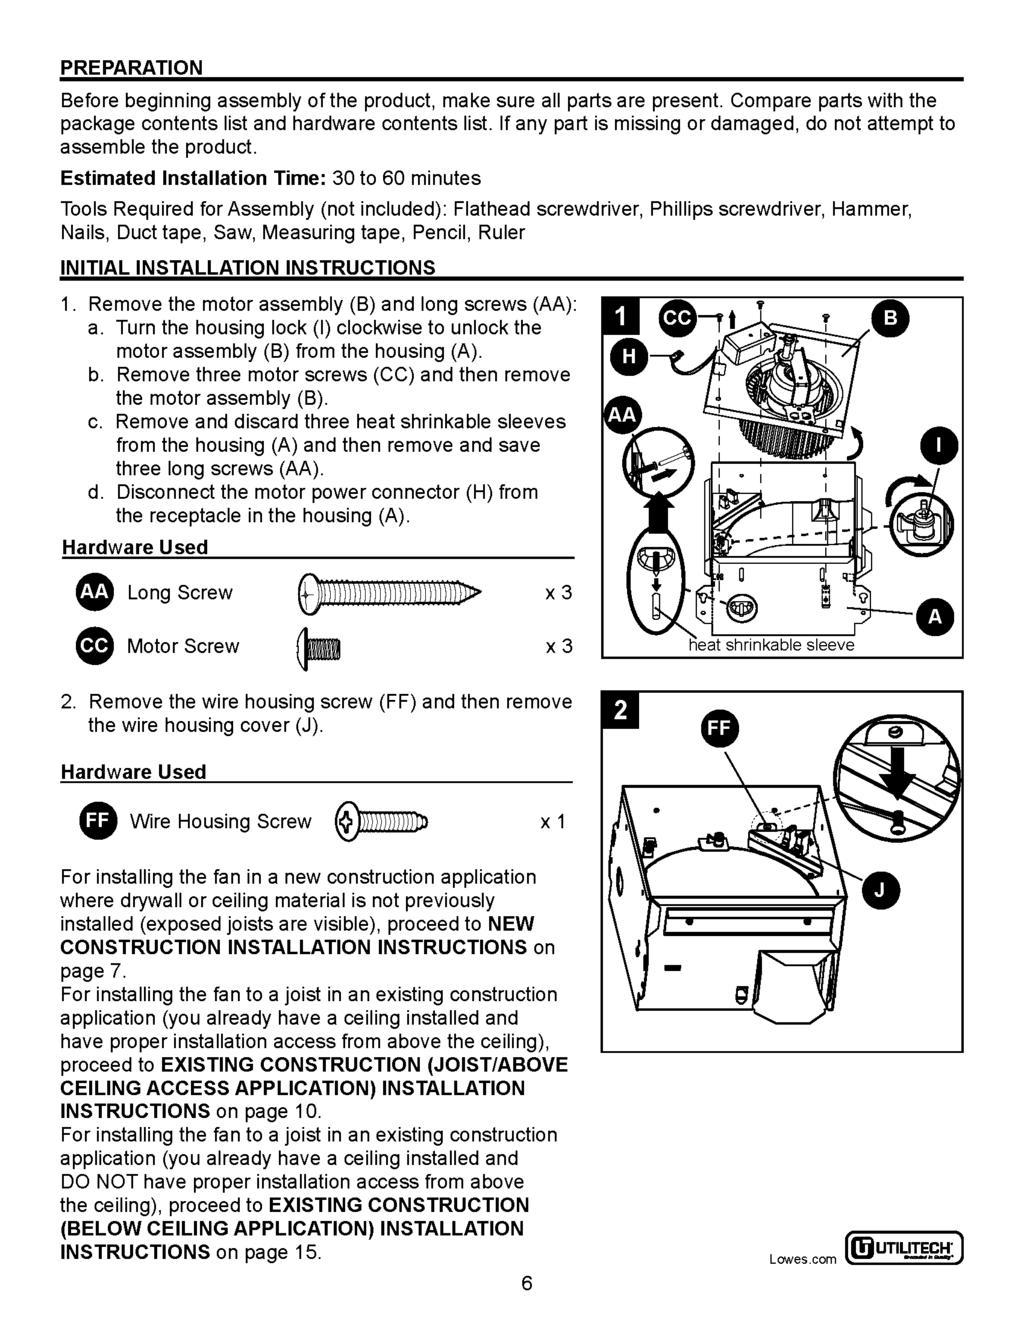 PREPARATION Before beginning assembly of the product, make sure all parts are present. Compare parts with the package contents list and hardware contents list.